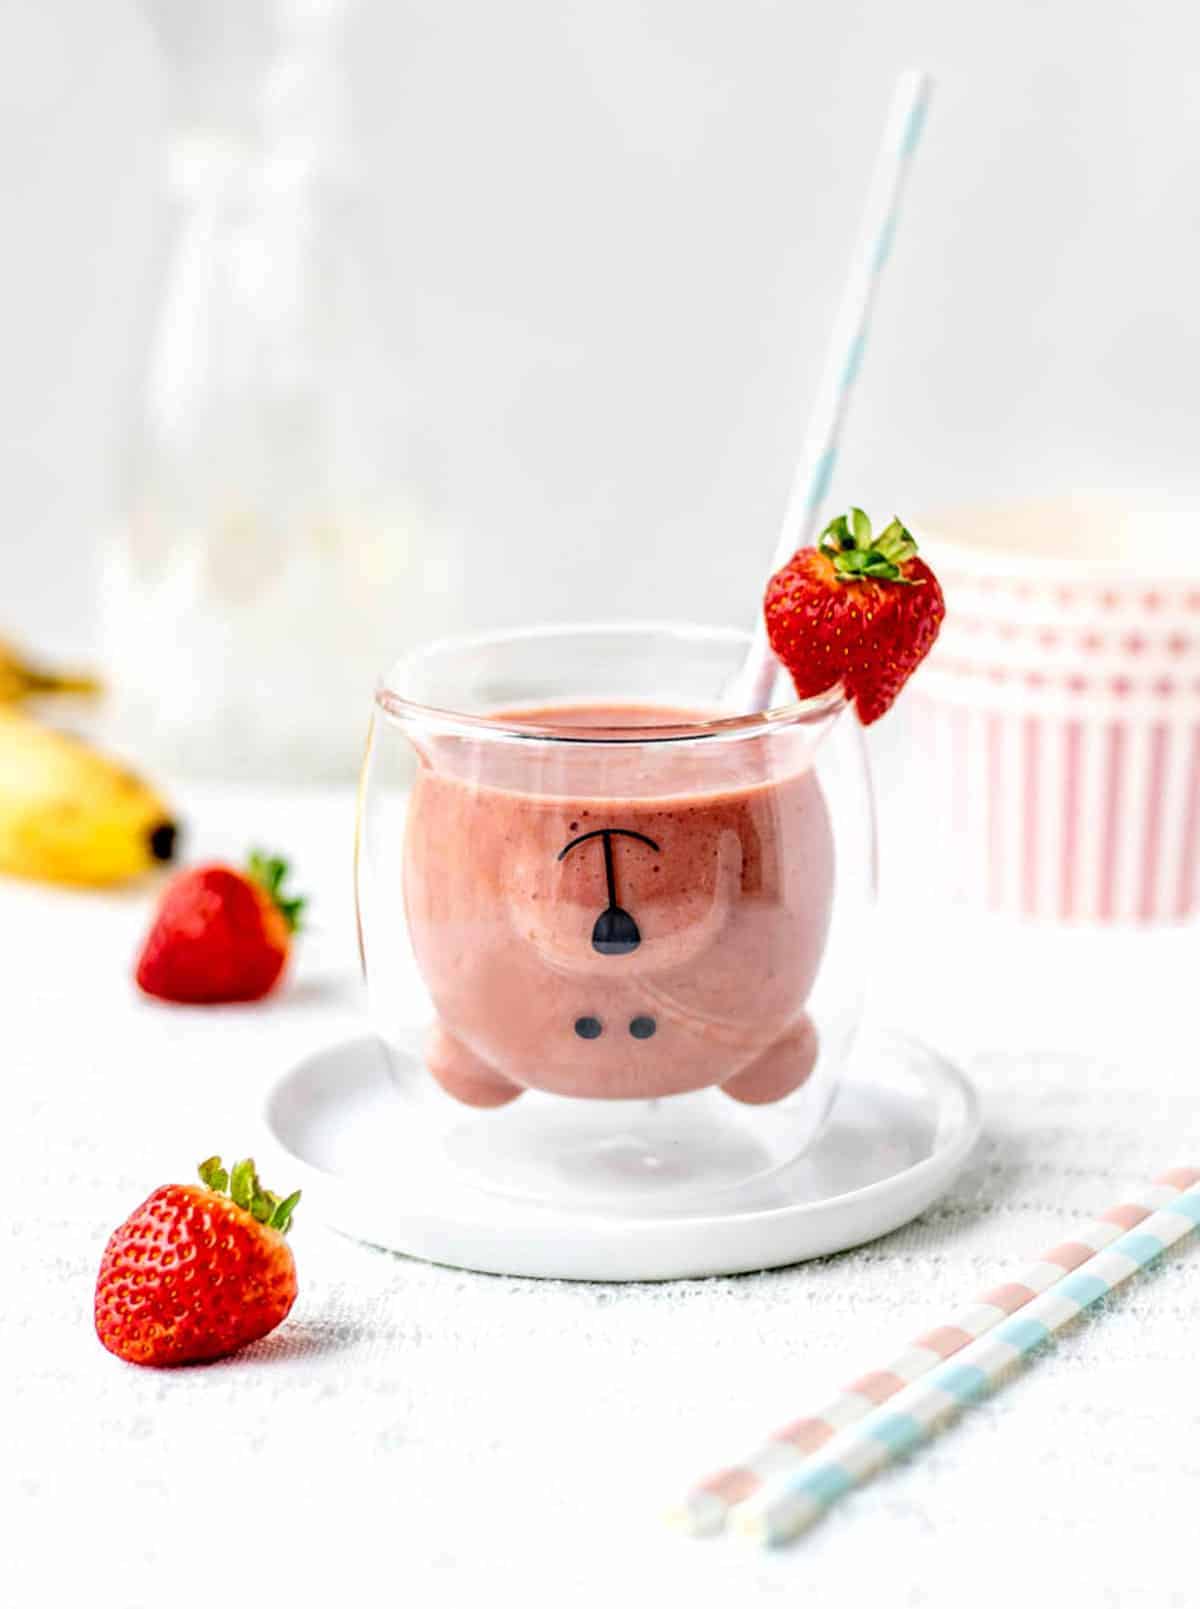 A strawberry banana smoothie in a teddy bear cup.